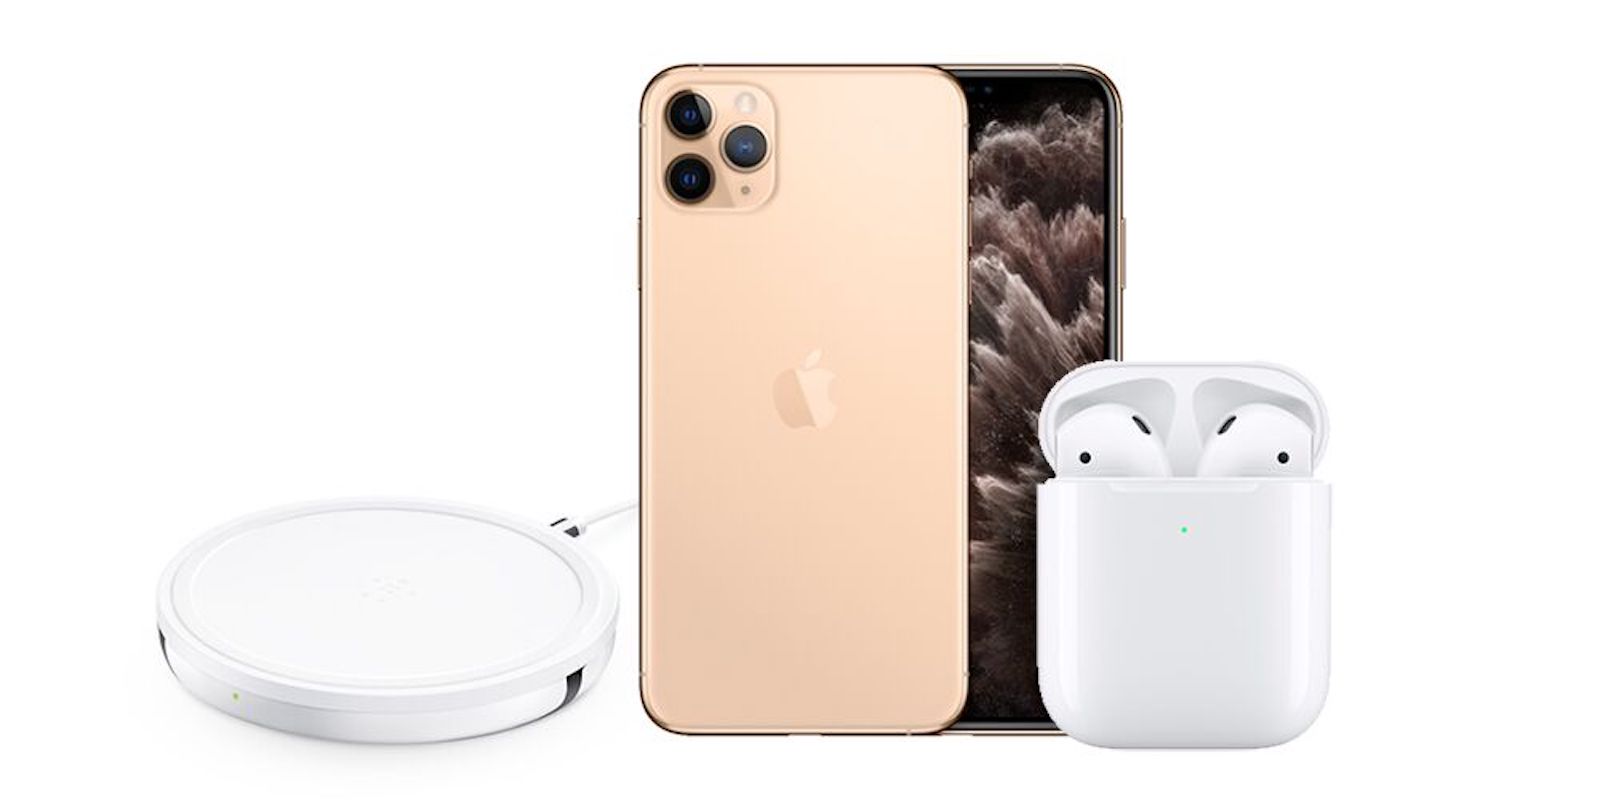 The iPhone 11 256GB + AirPods & Charging Pad Giveaway